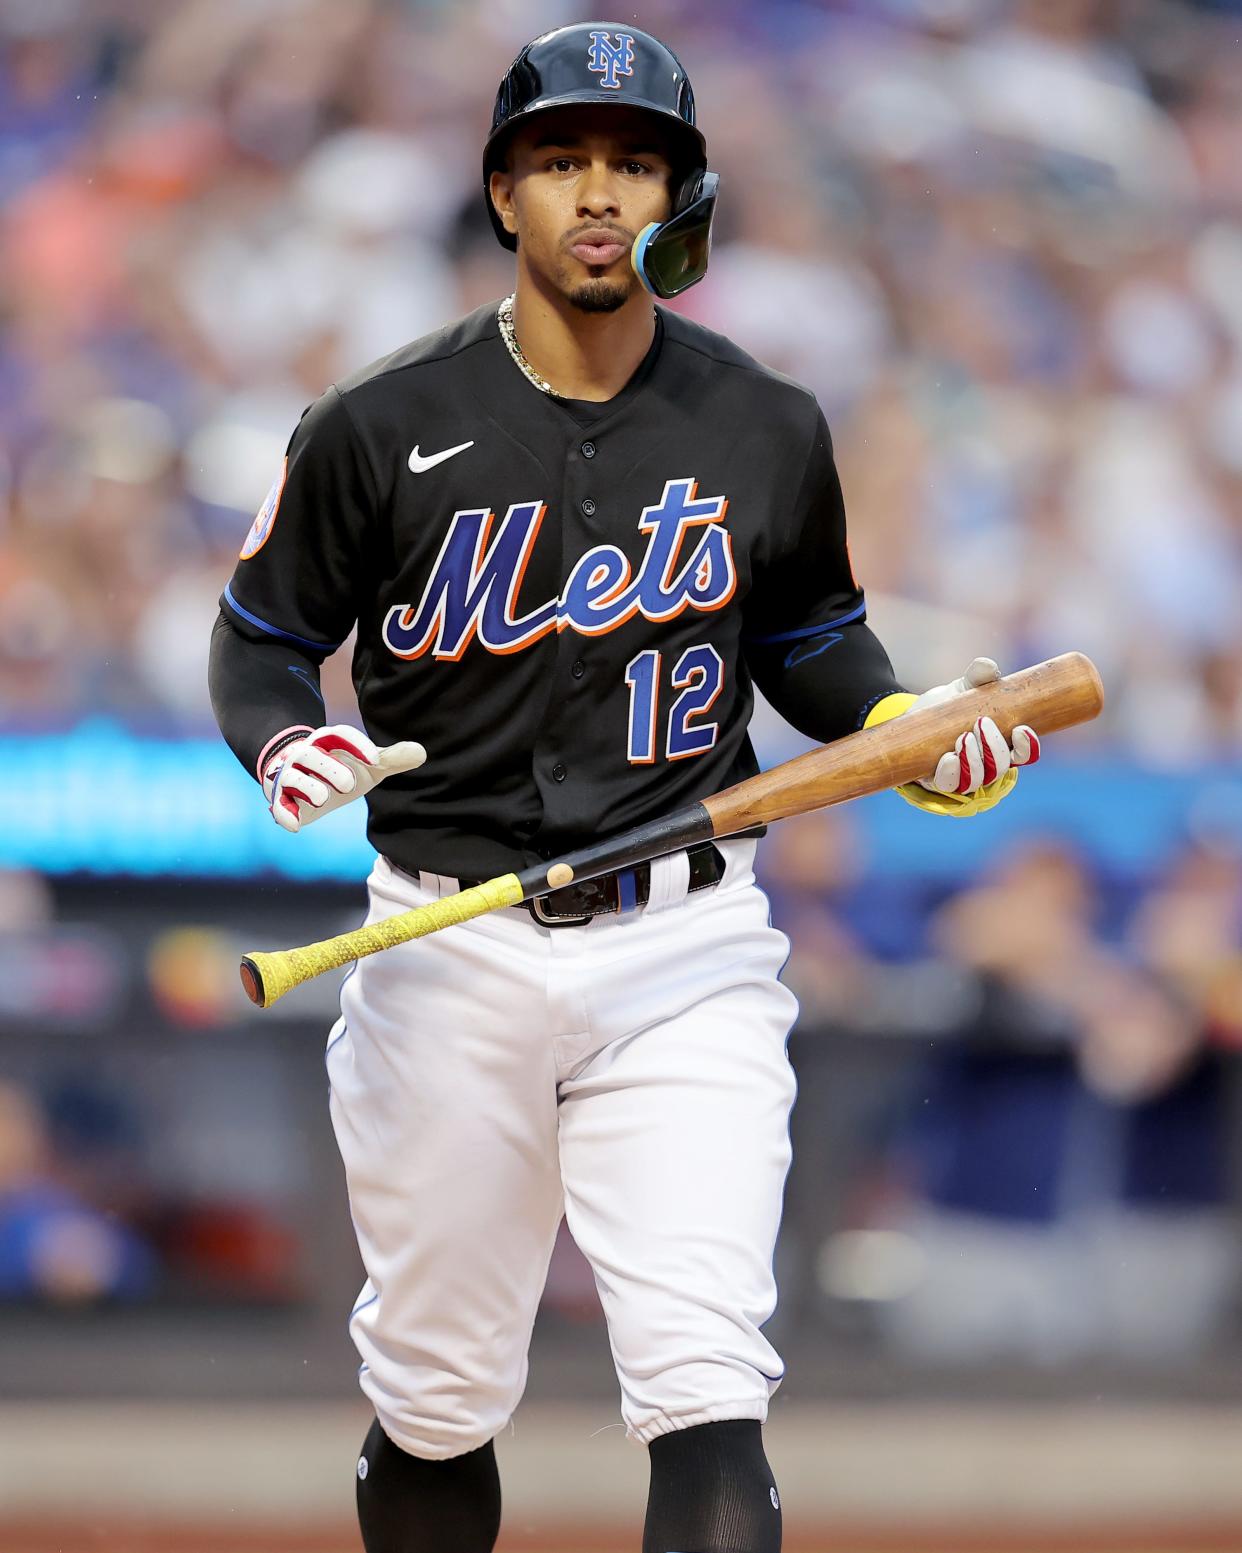 Jul 14, 2023; New York City, New York, USA; New York Mets shortstop Francisco Lindor (12) reacts after striking out during the first inning against the Los Angeles Dodgers at Citi Field. Mandatory Credit: Brad Penner-USA TODAY Sports